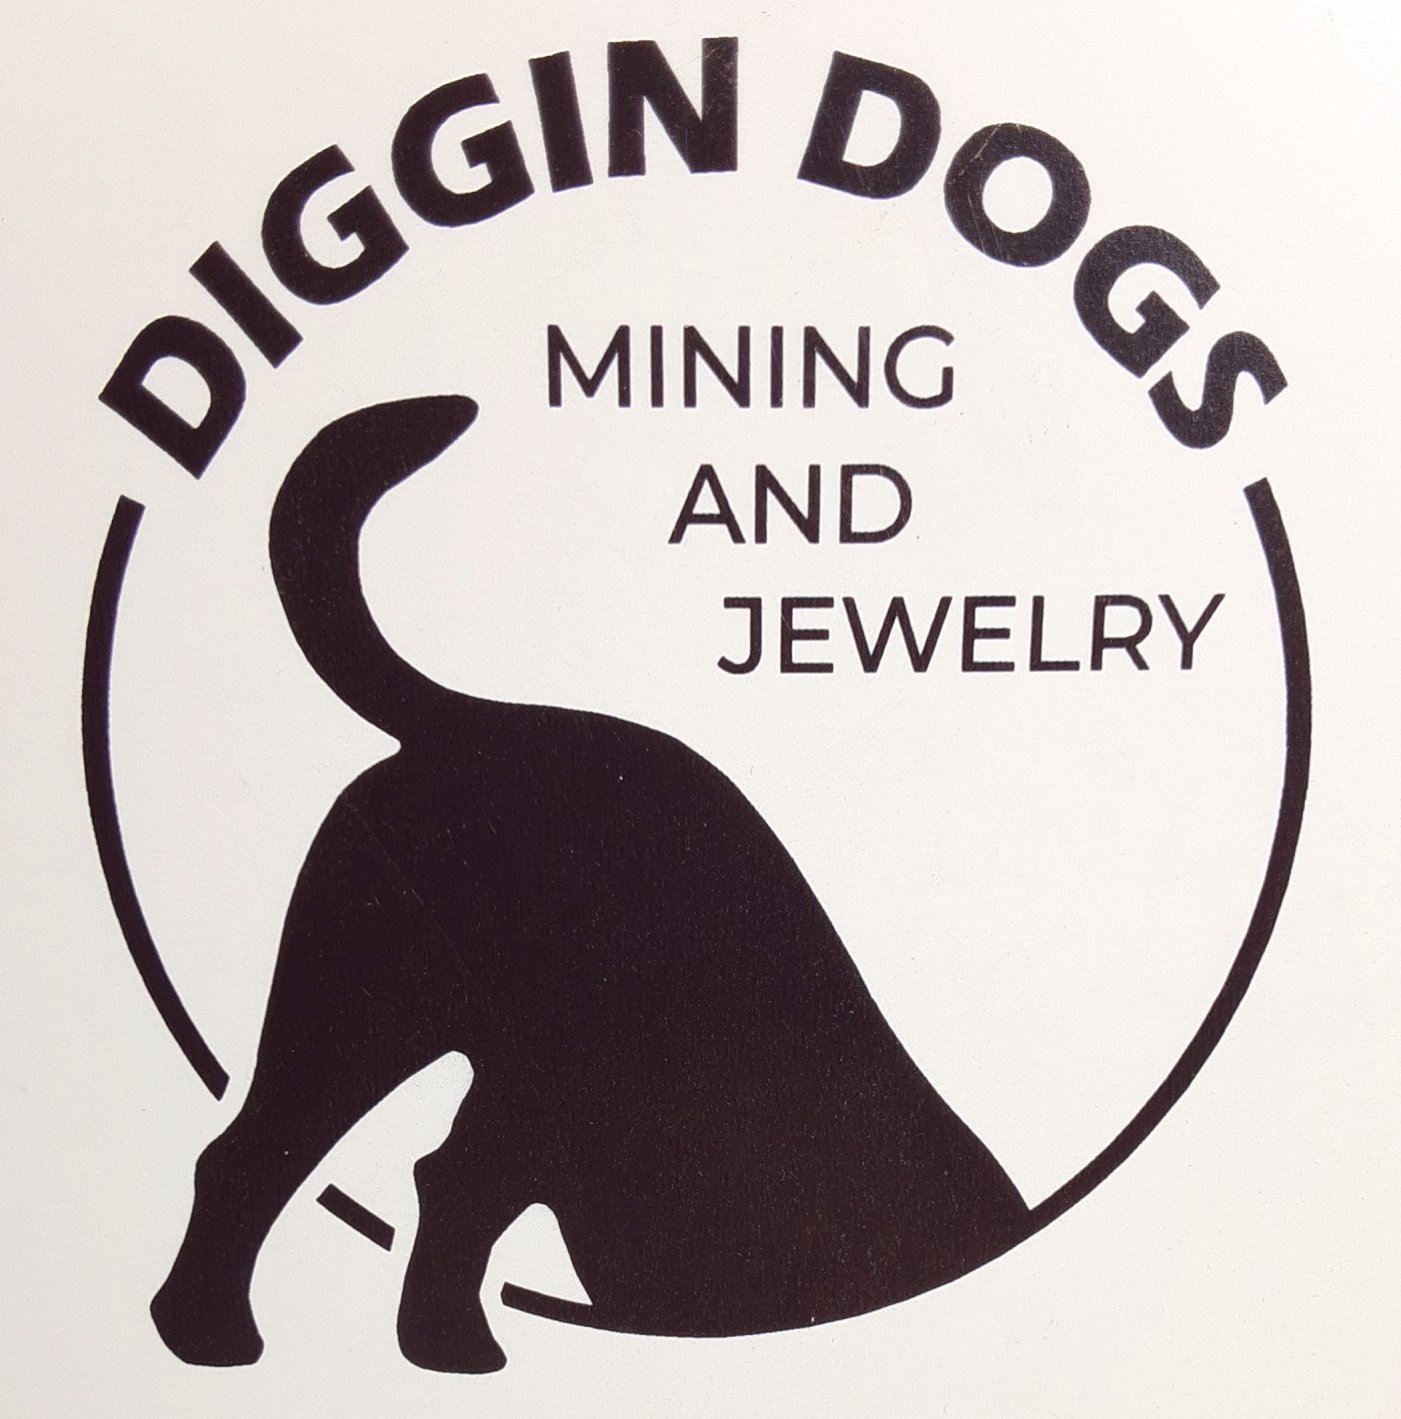 Diggin&#39; Dogs Mining and Jewelry     